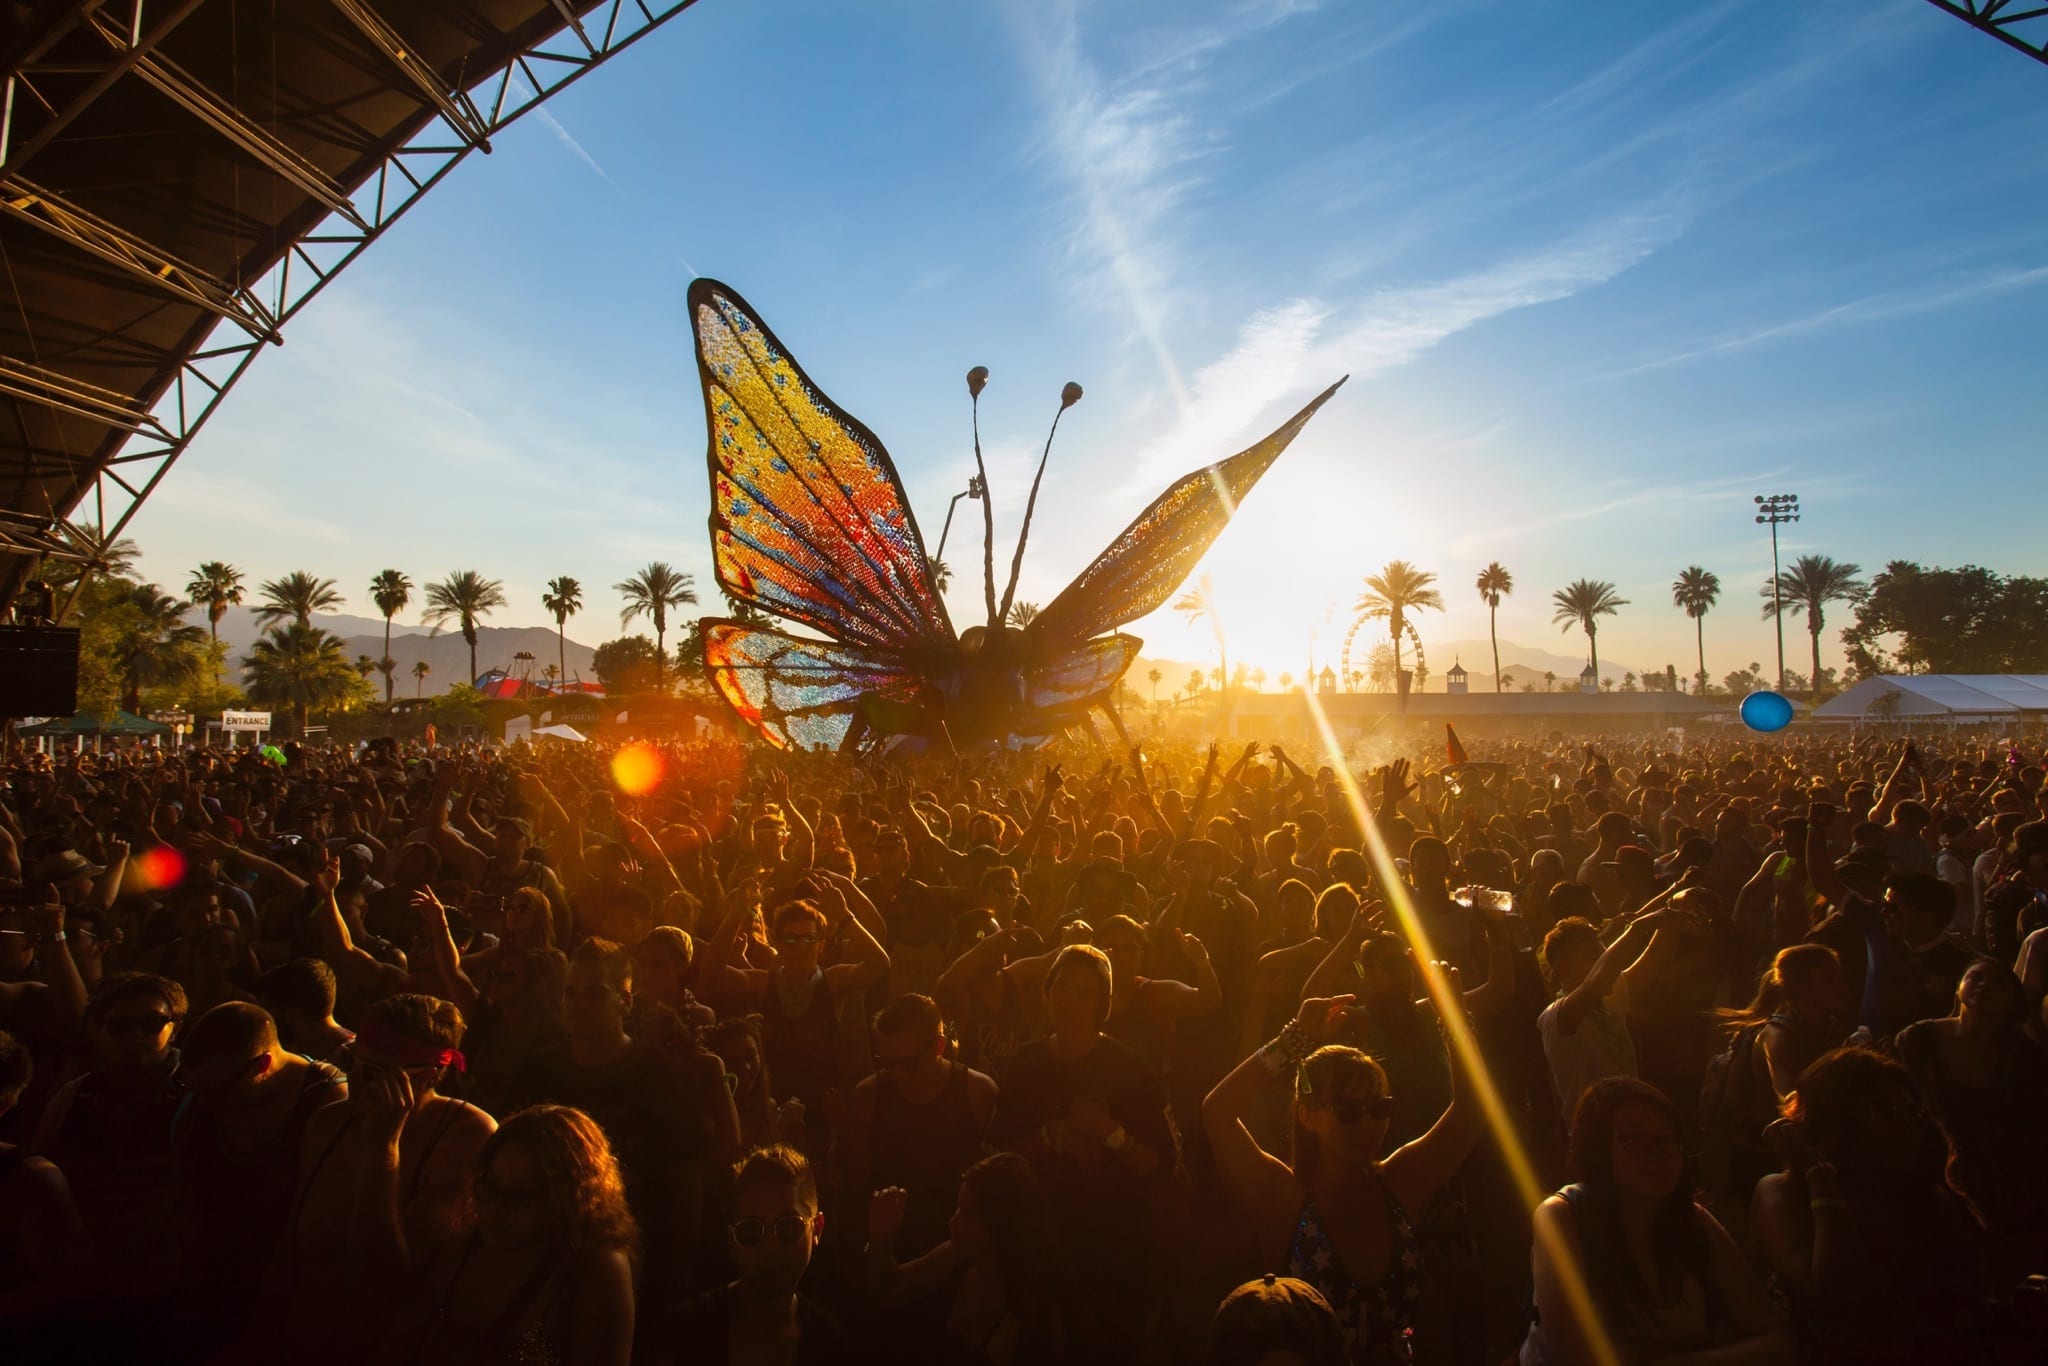 Poetic Kinetics' Coachella Butterfly in the crowd at Coachella 2015.